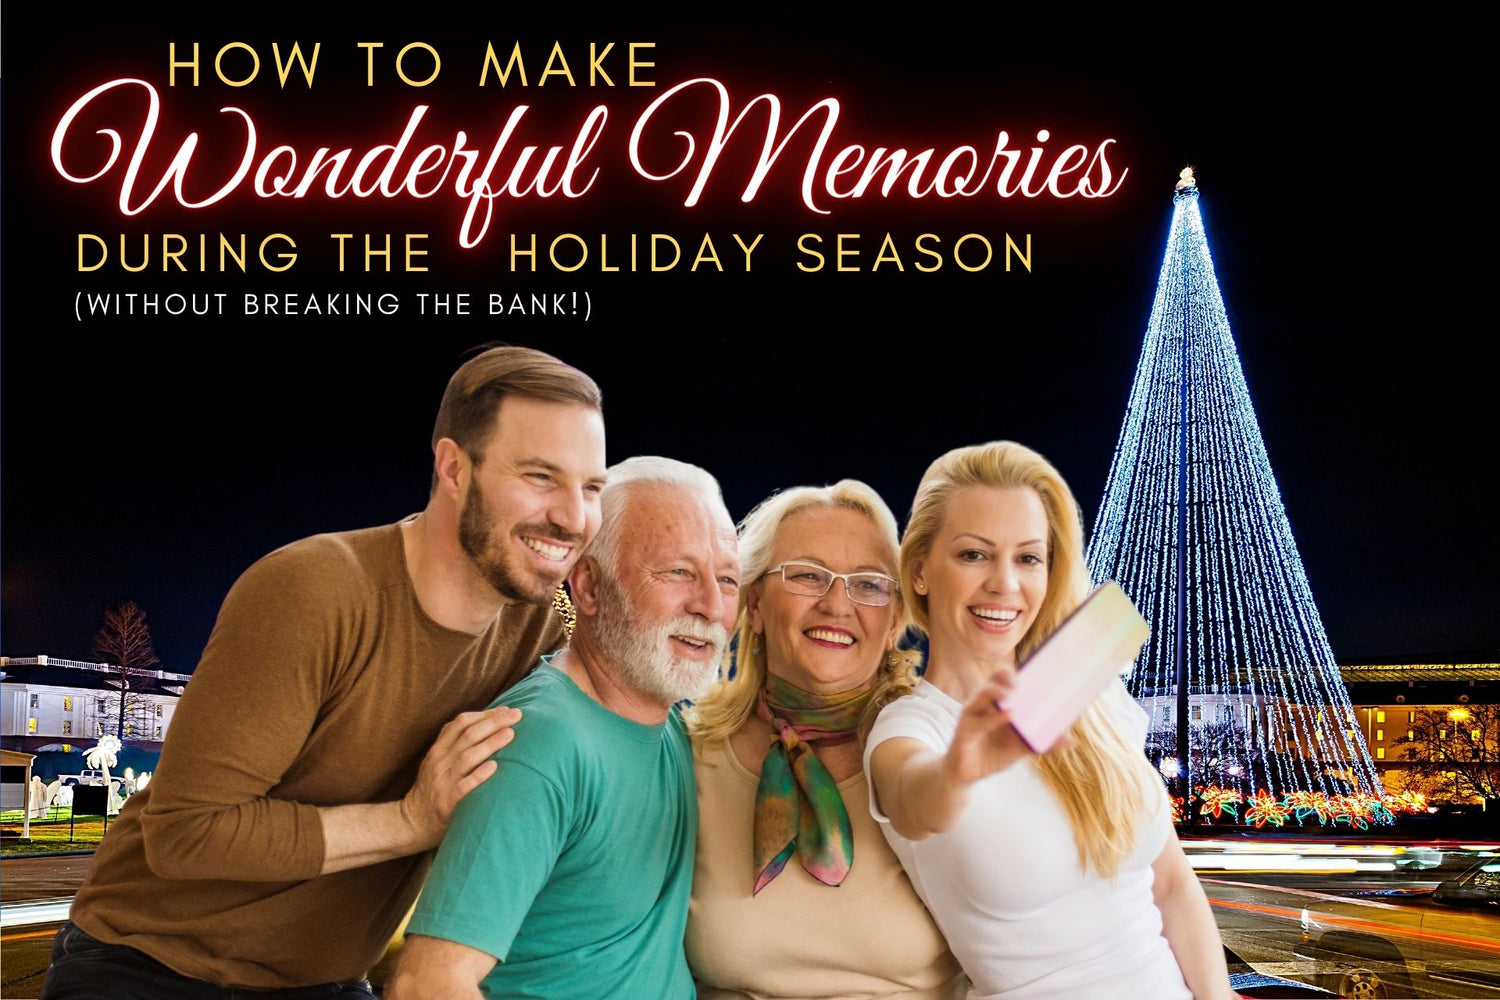 How to Make Memories During the Holiday Season 🎄 - Without BREAKING THE BANK!